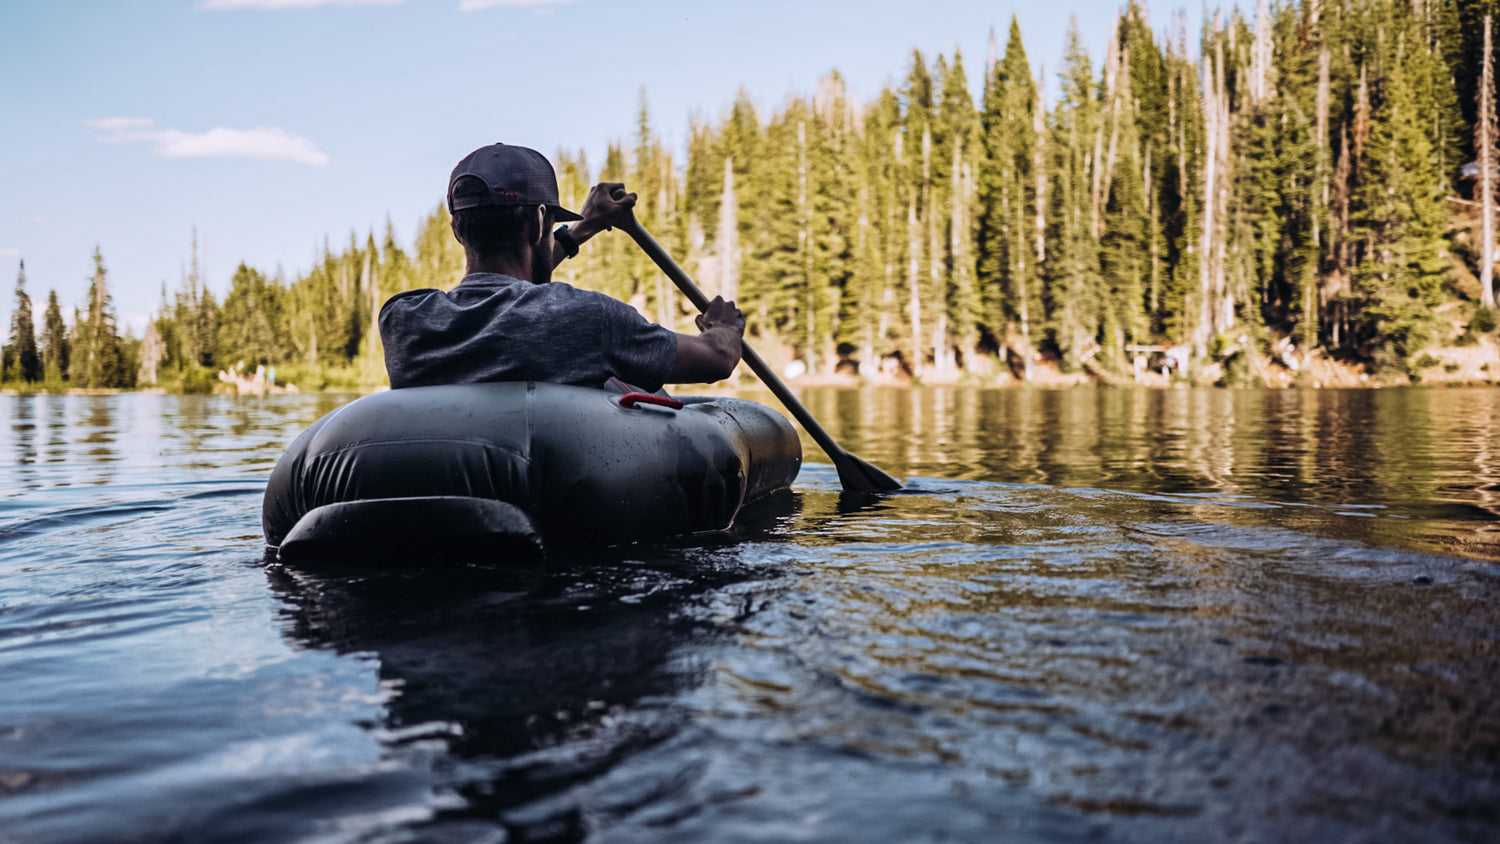 Uncharted Supply Co. Rapid Raft V2 in  by GOHUNT | Uncharted Supply Co. - GOHUNT Shop